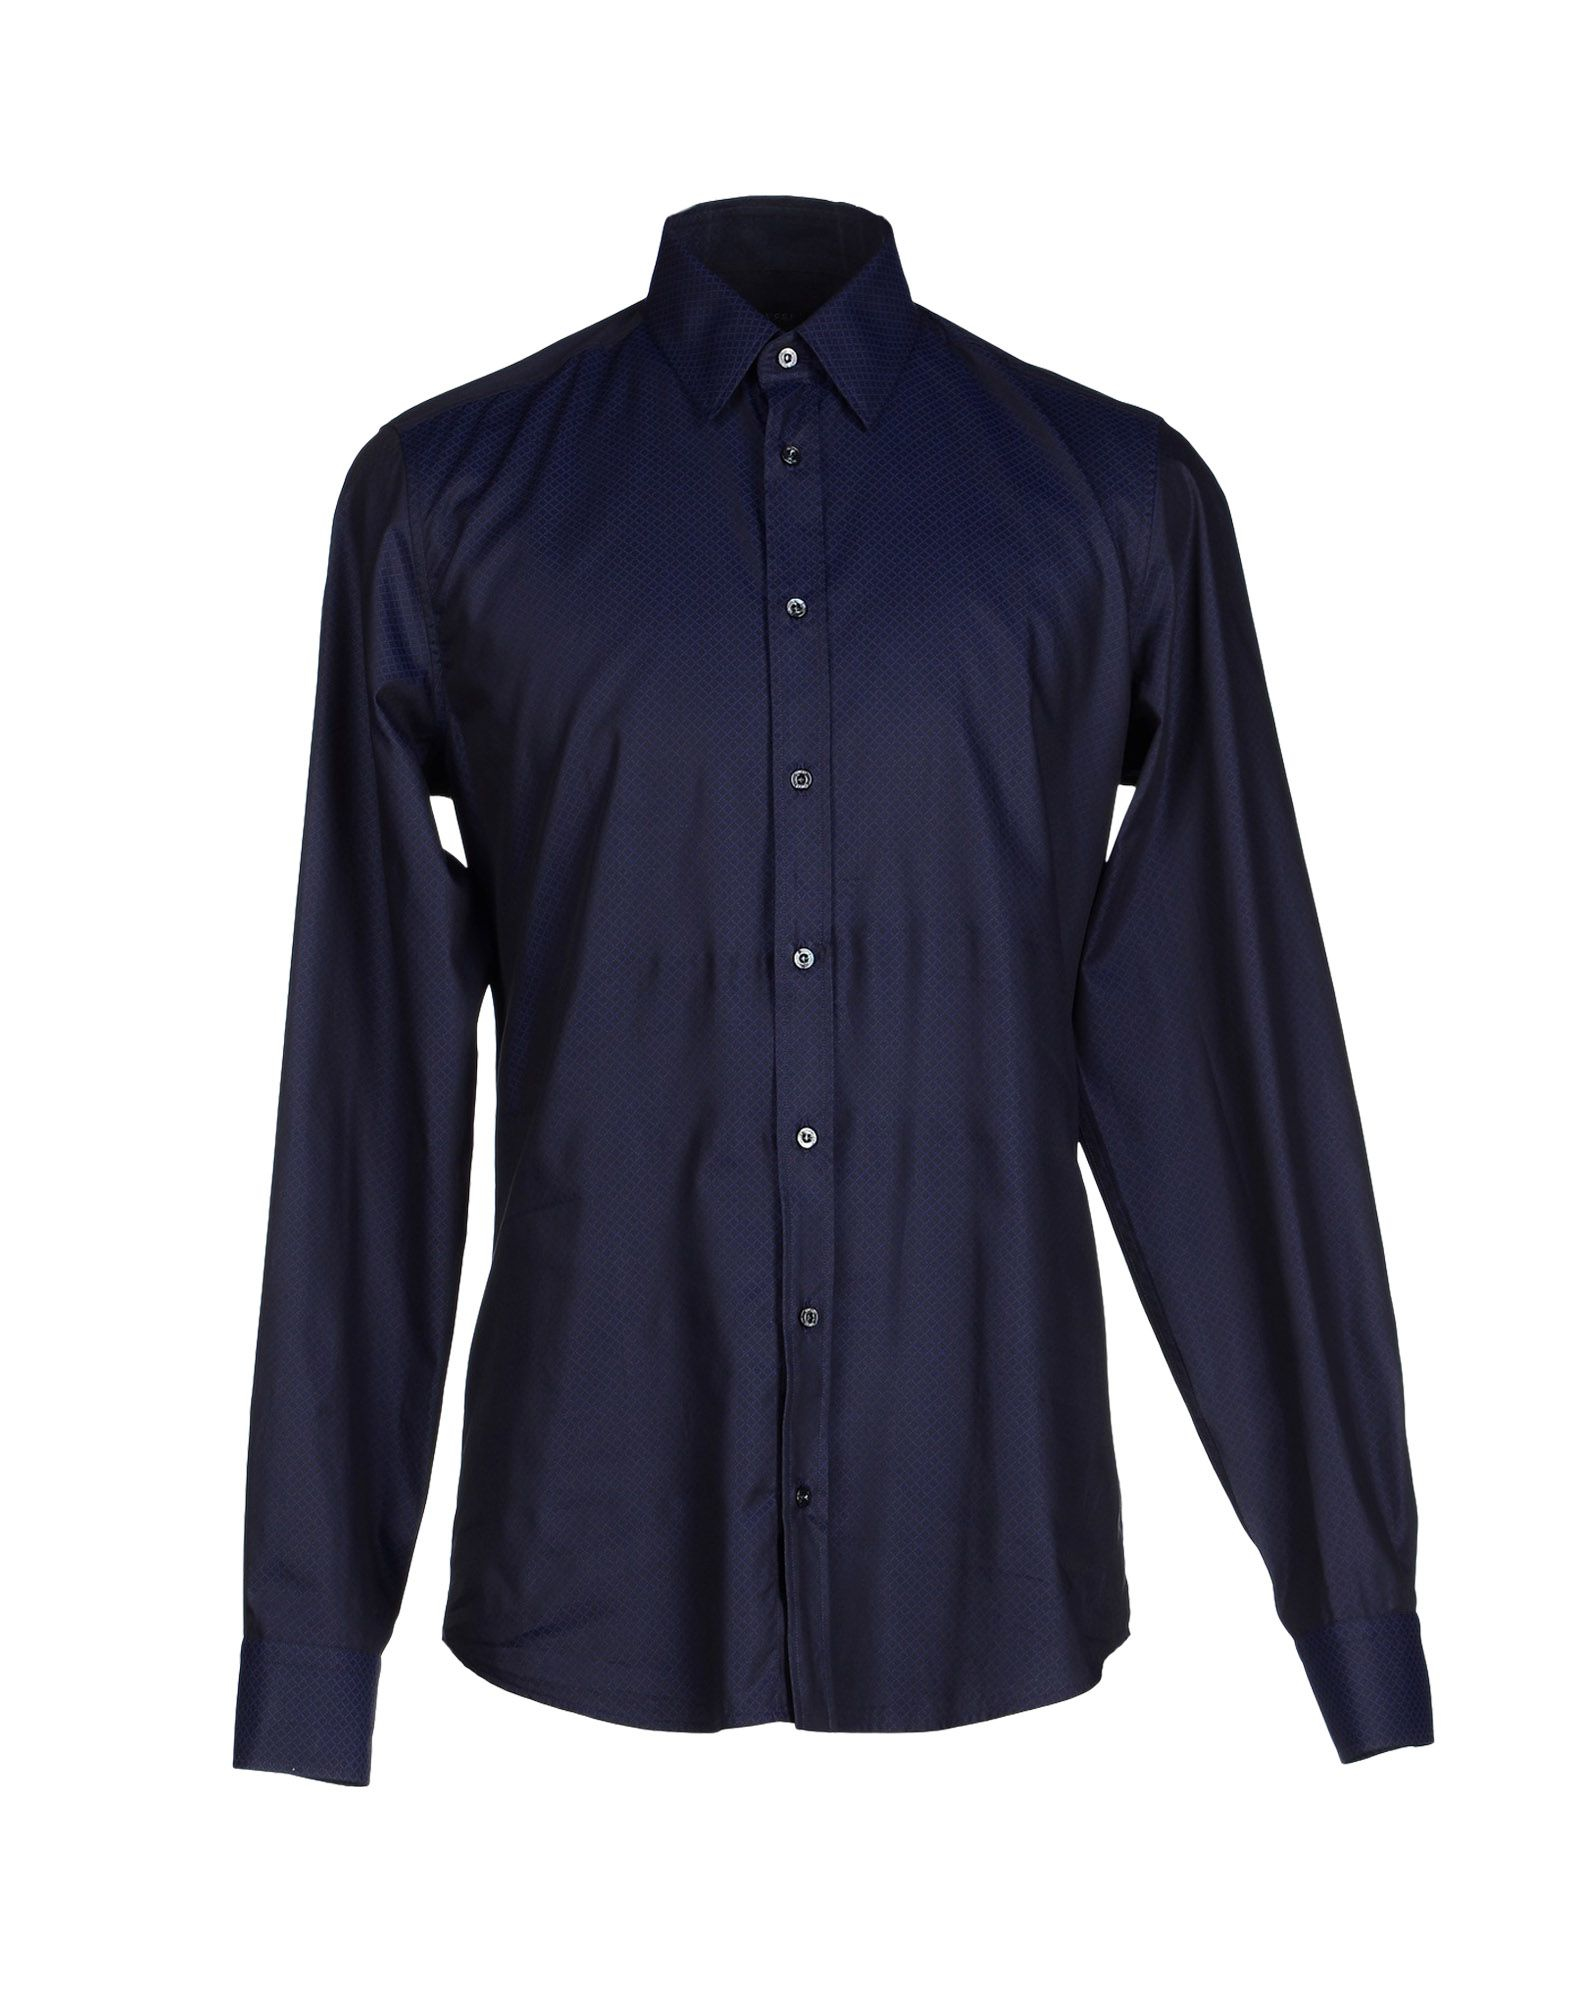 Lyst - Gucci Shirt in Blue for Men